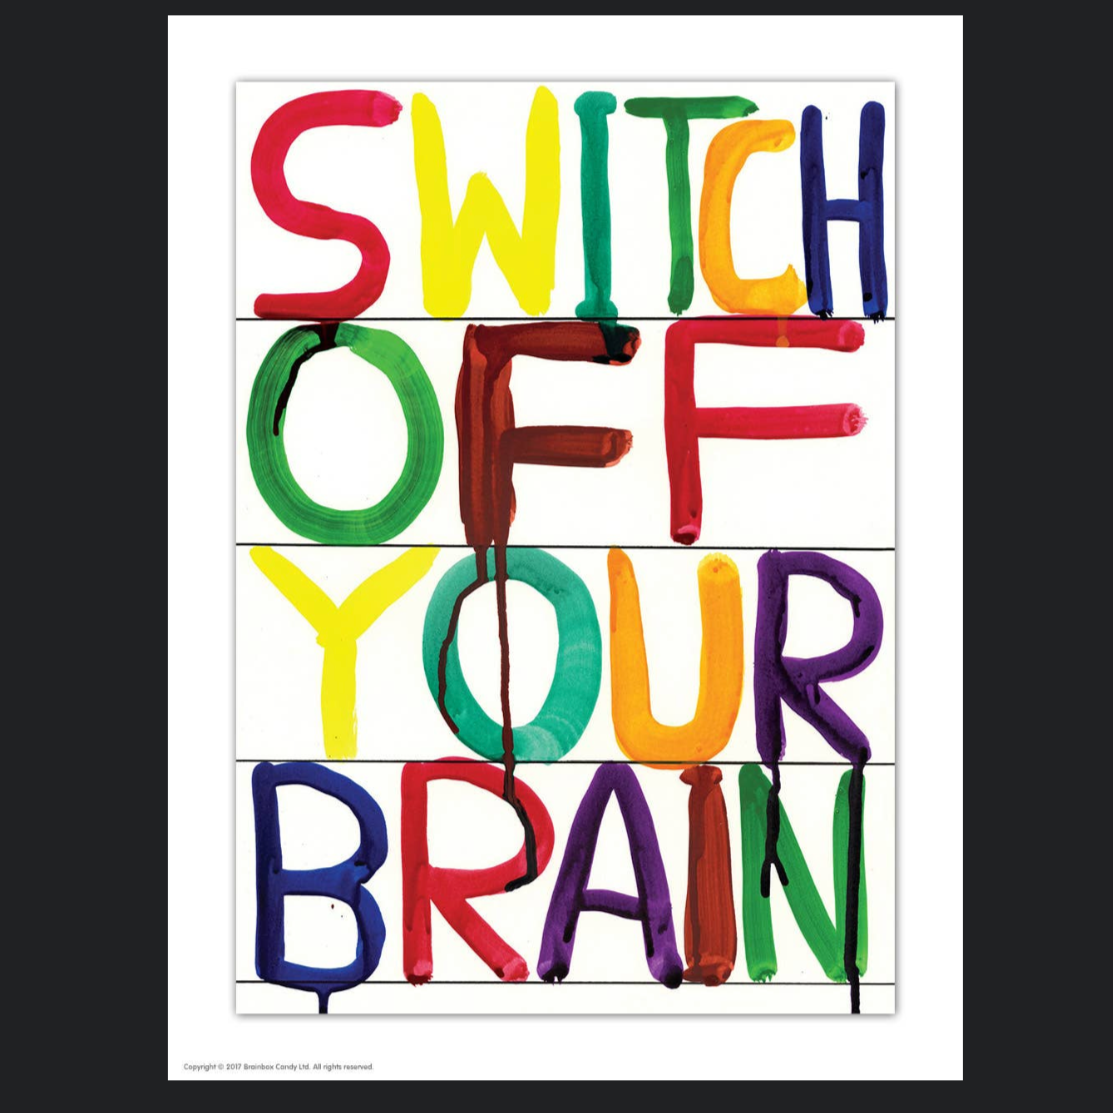 Switch Off Your Brain Postcard